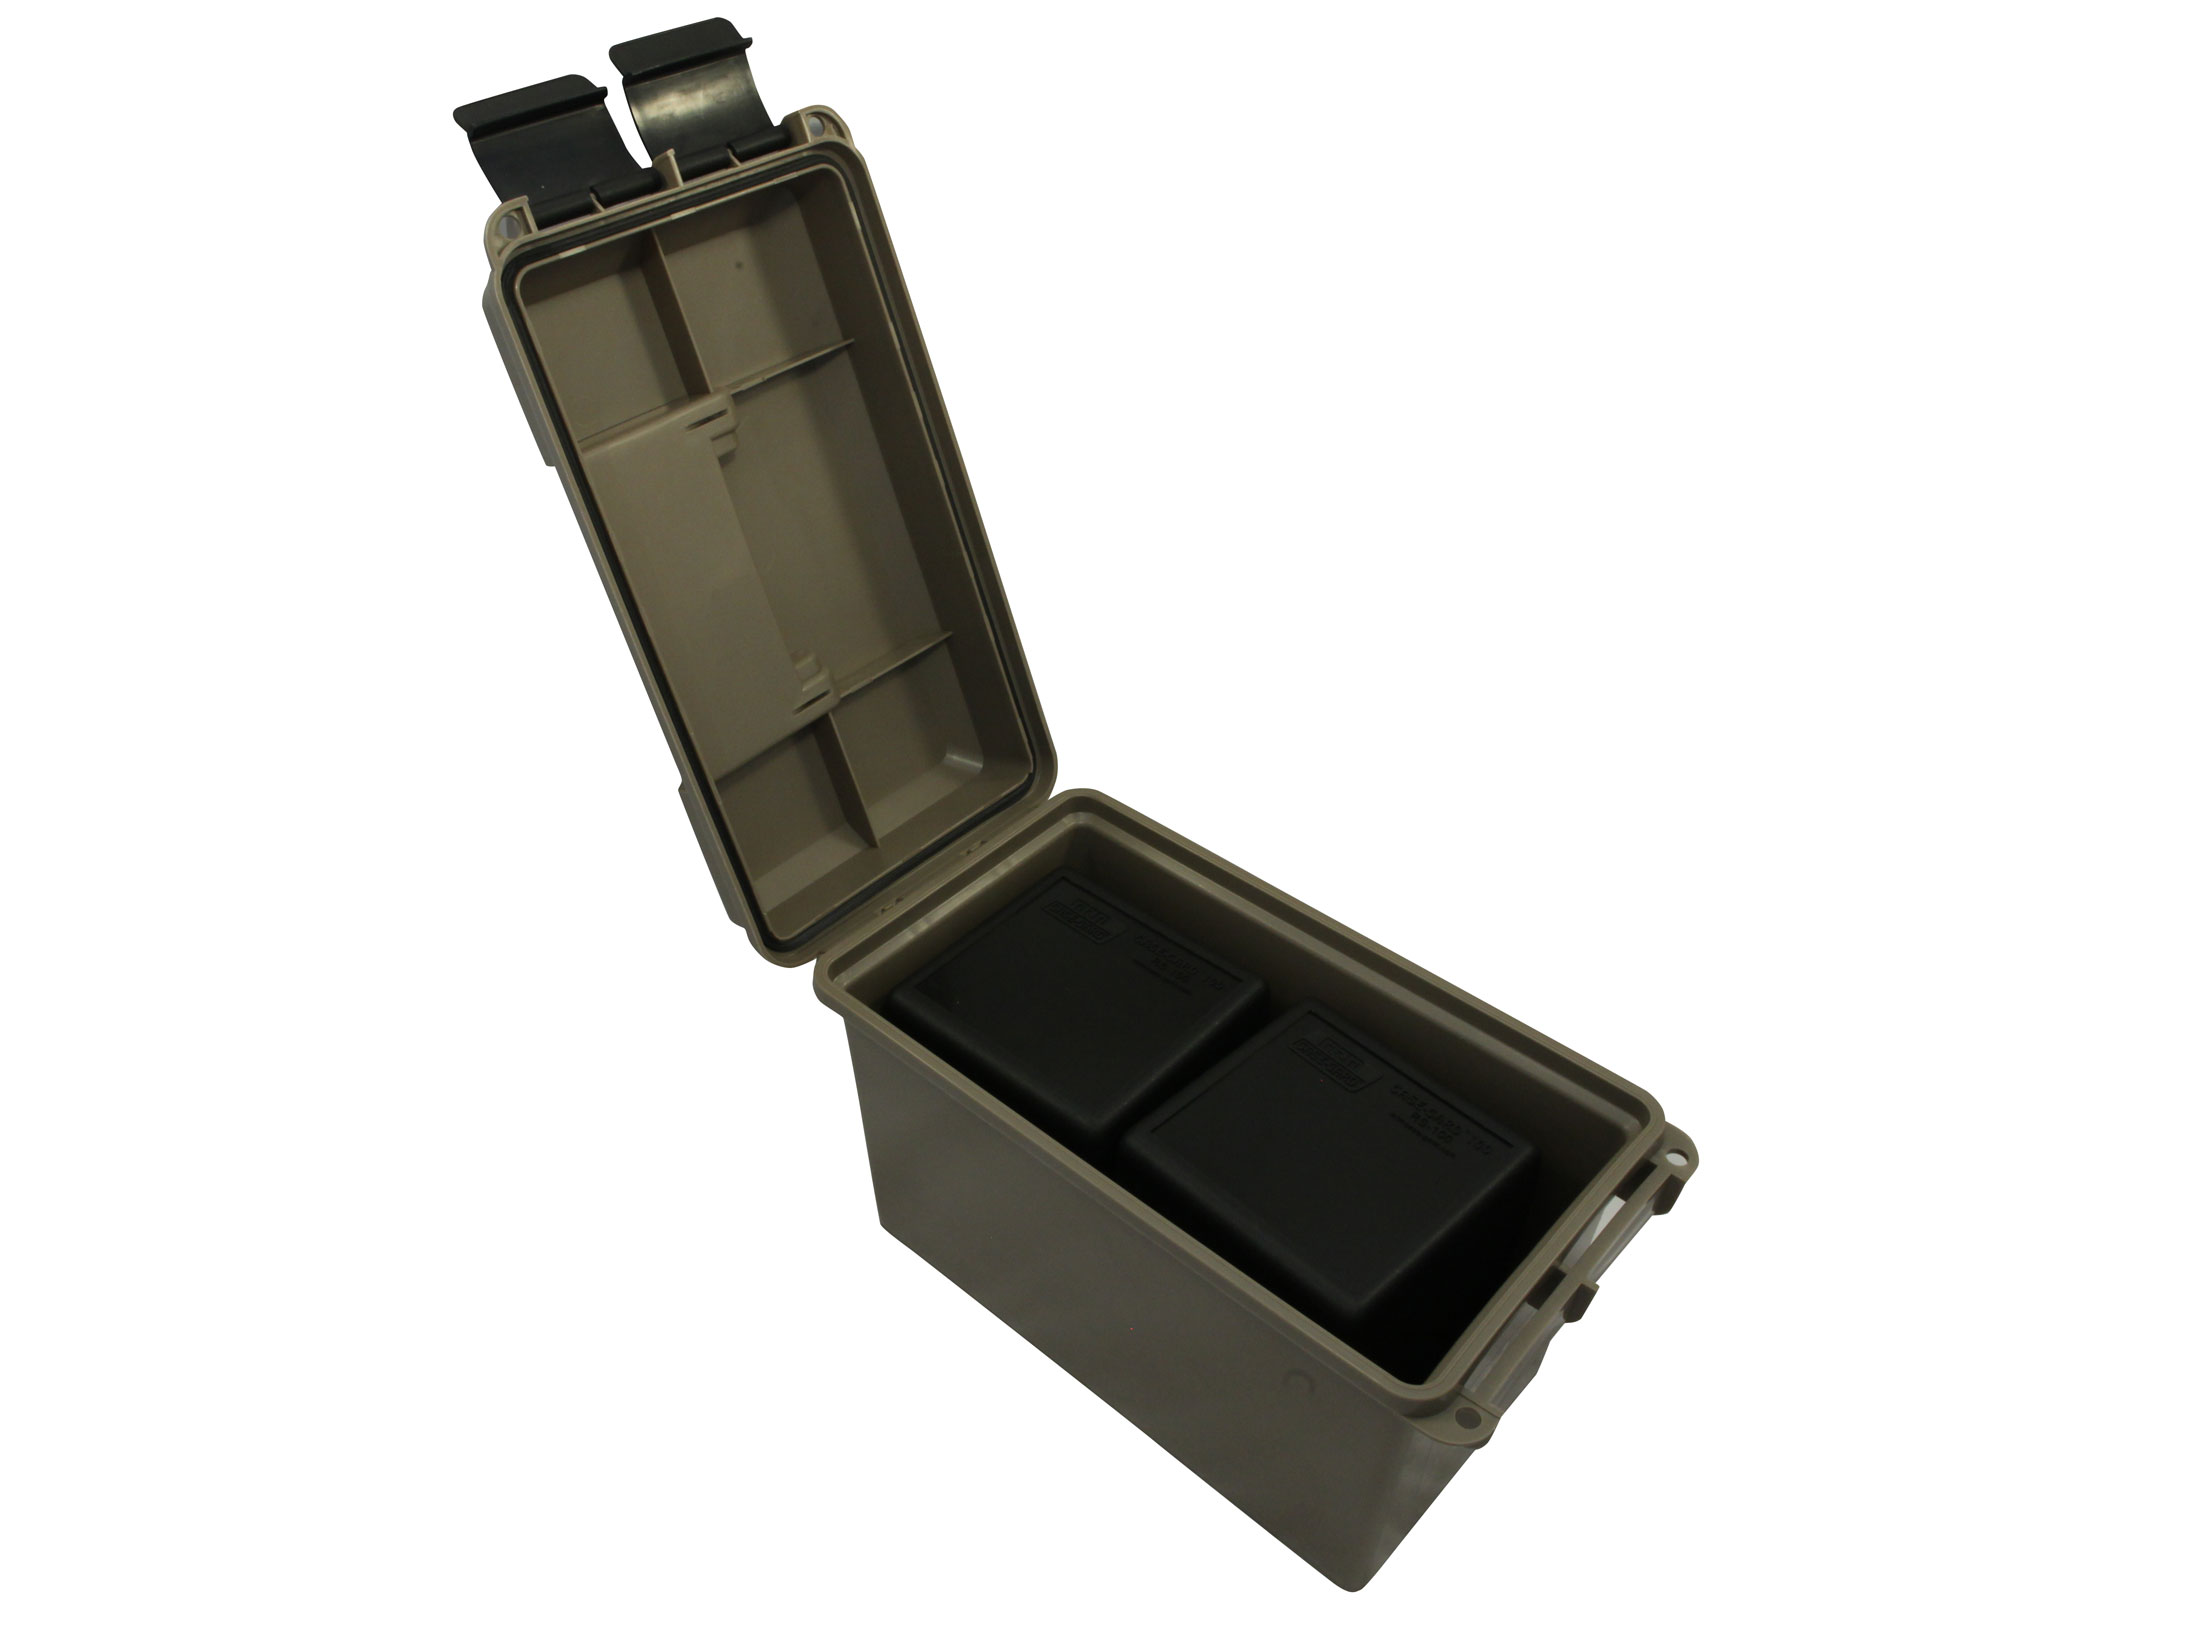 DARK EARTH MTM .223 400 ROUNDS 5.56 PLASTIC AMMO CAN 